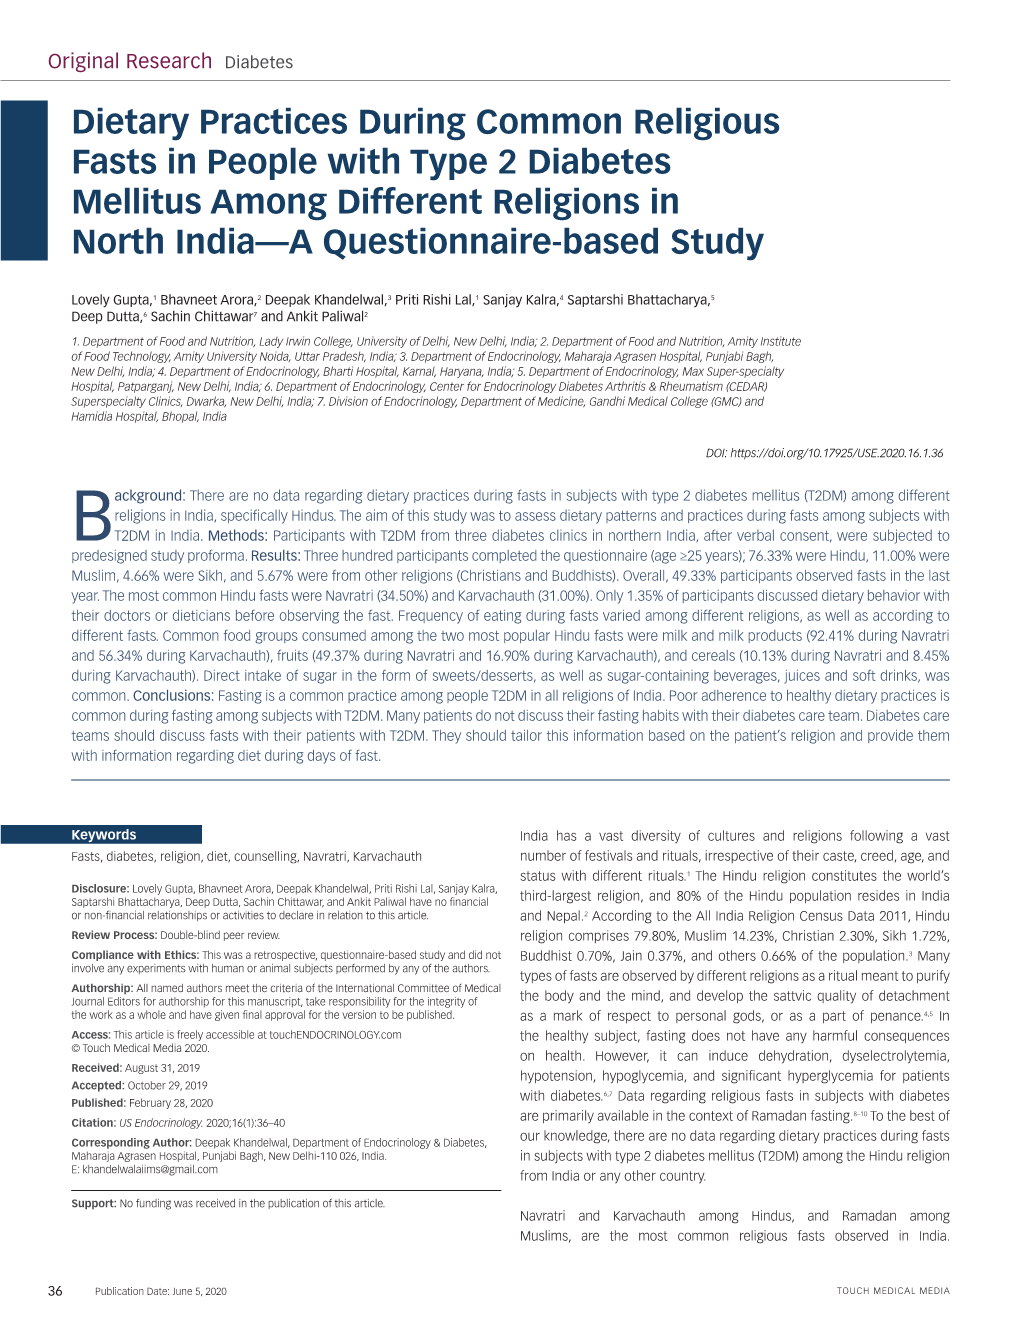 Dietary Practices During Common Religious Fasts in People with Type 2 Diabetes Mellitus Among Different Religions in North India—A Questionnaire-Based Study